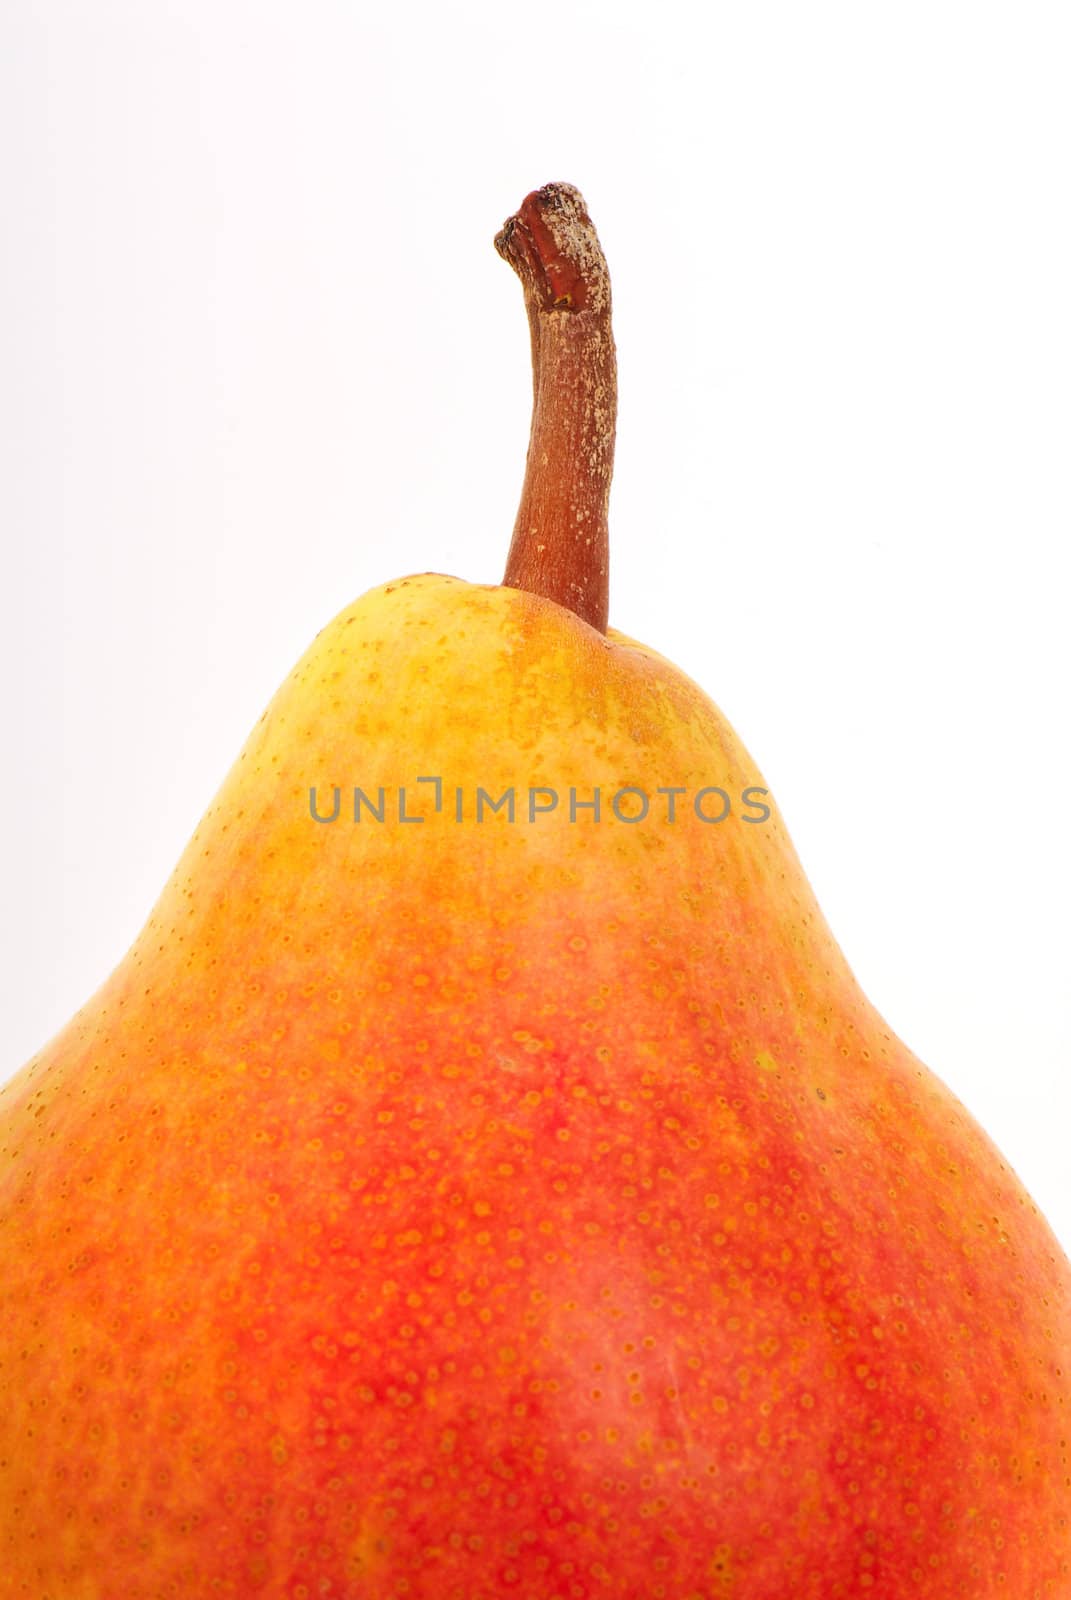 Ripe pear which has been removed in studio. A close up